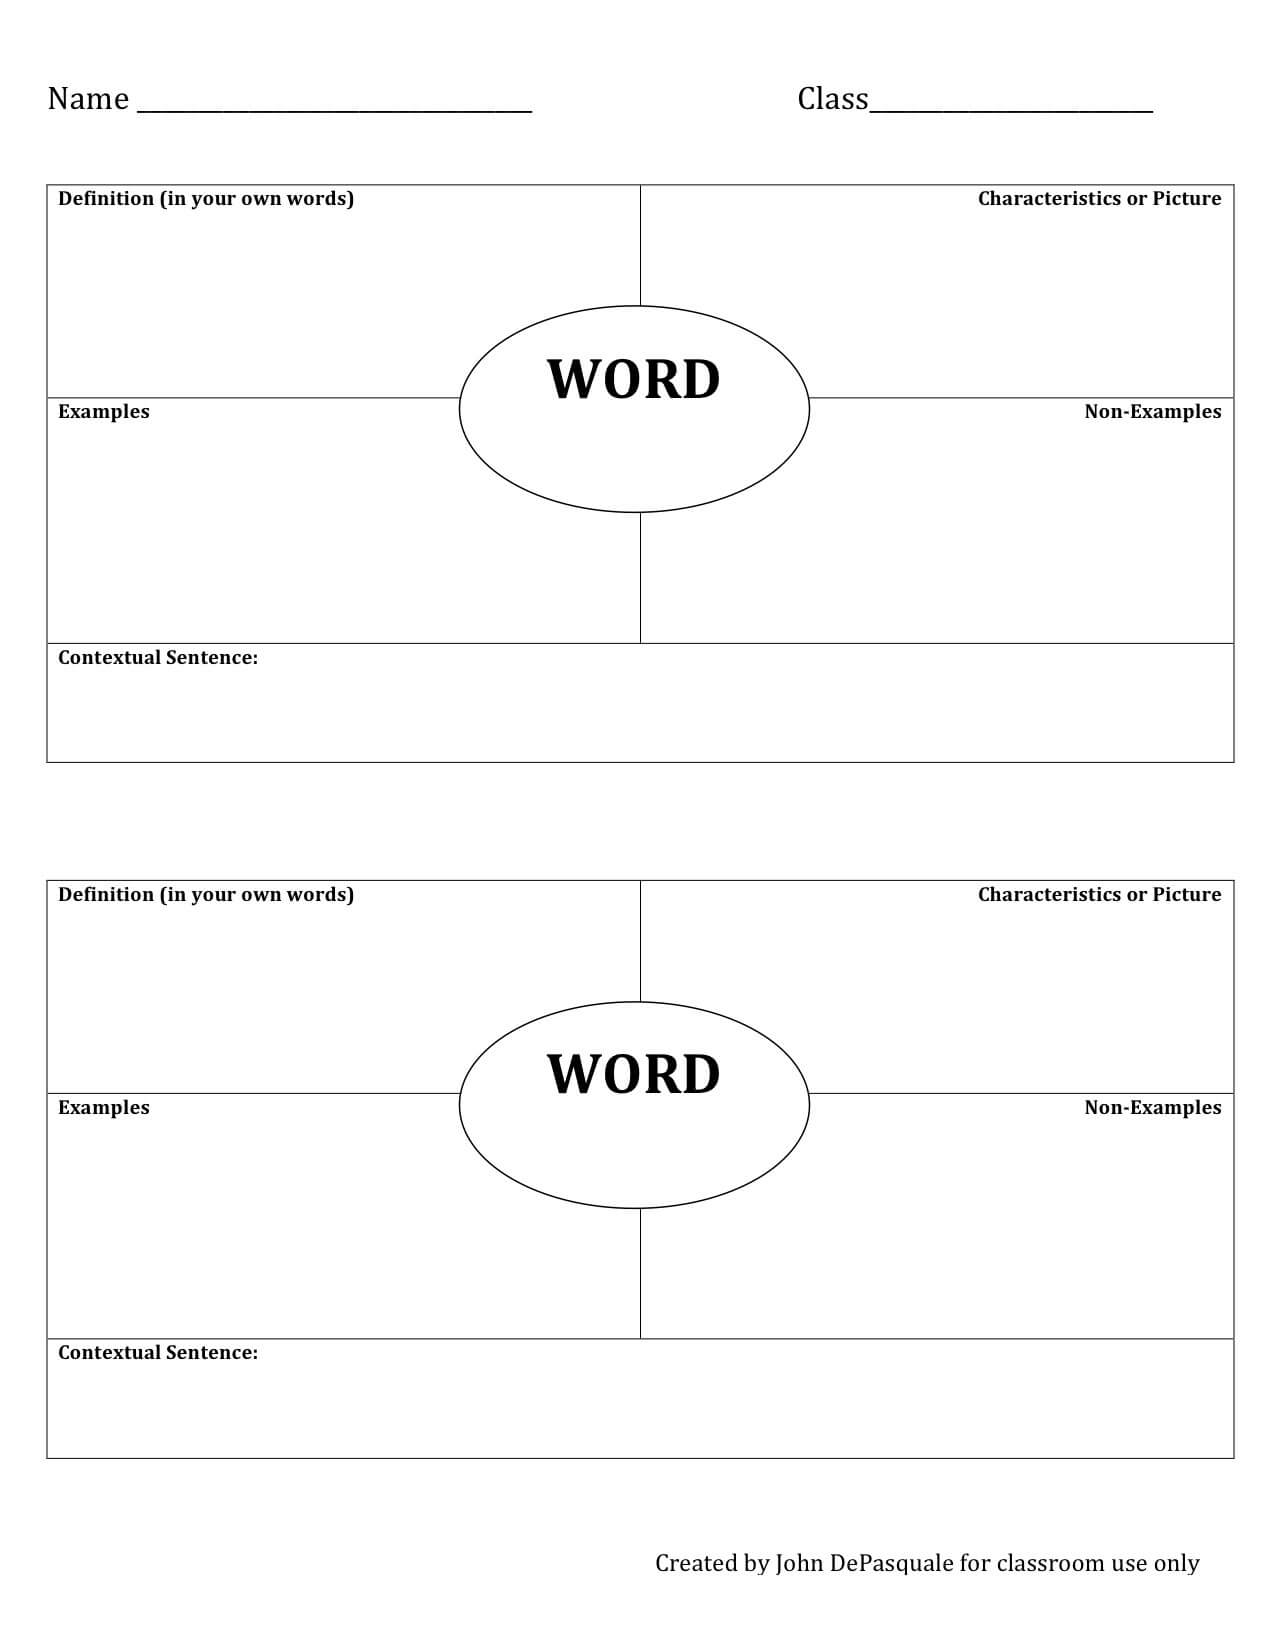 Content Area Literacy: Focusing On Vocabulary | Scholastic Inside Vocabulary Words Worksheet Template